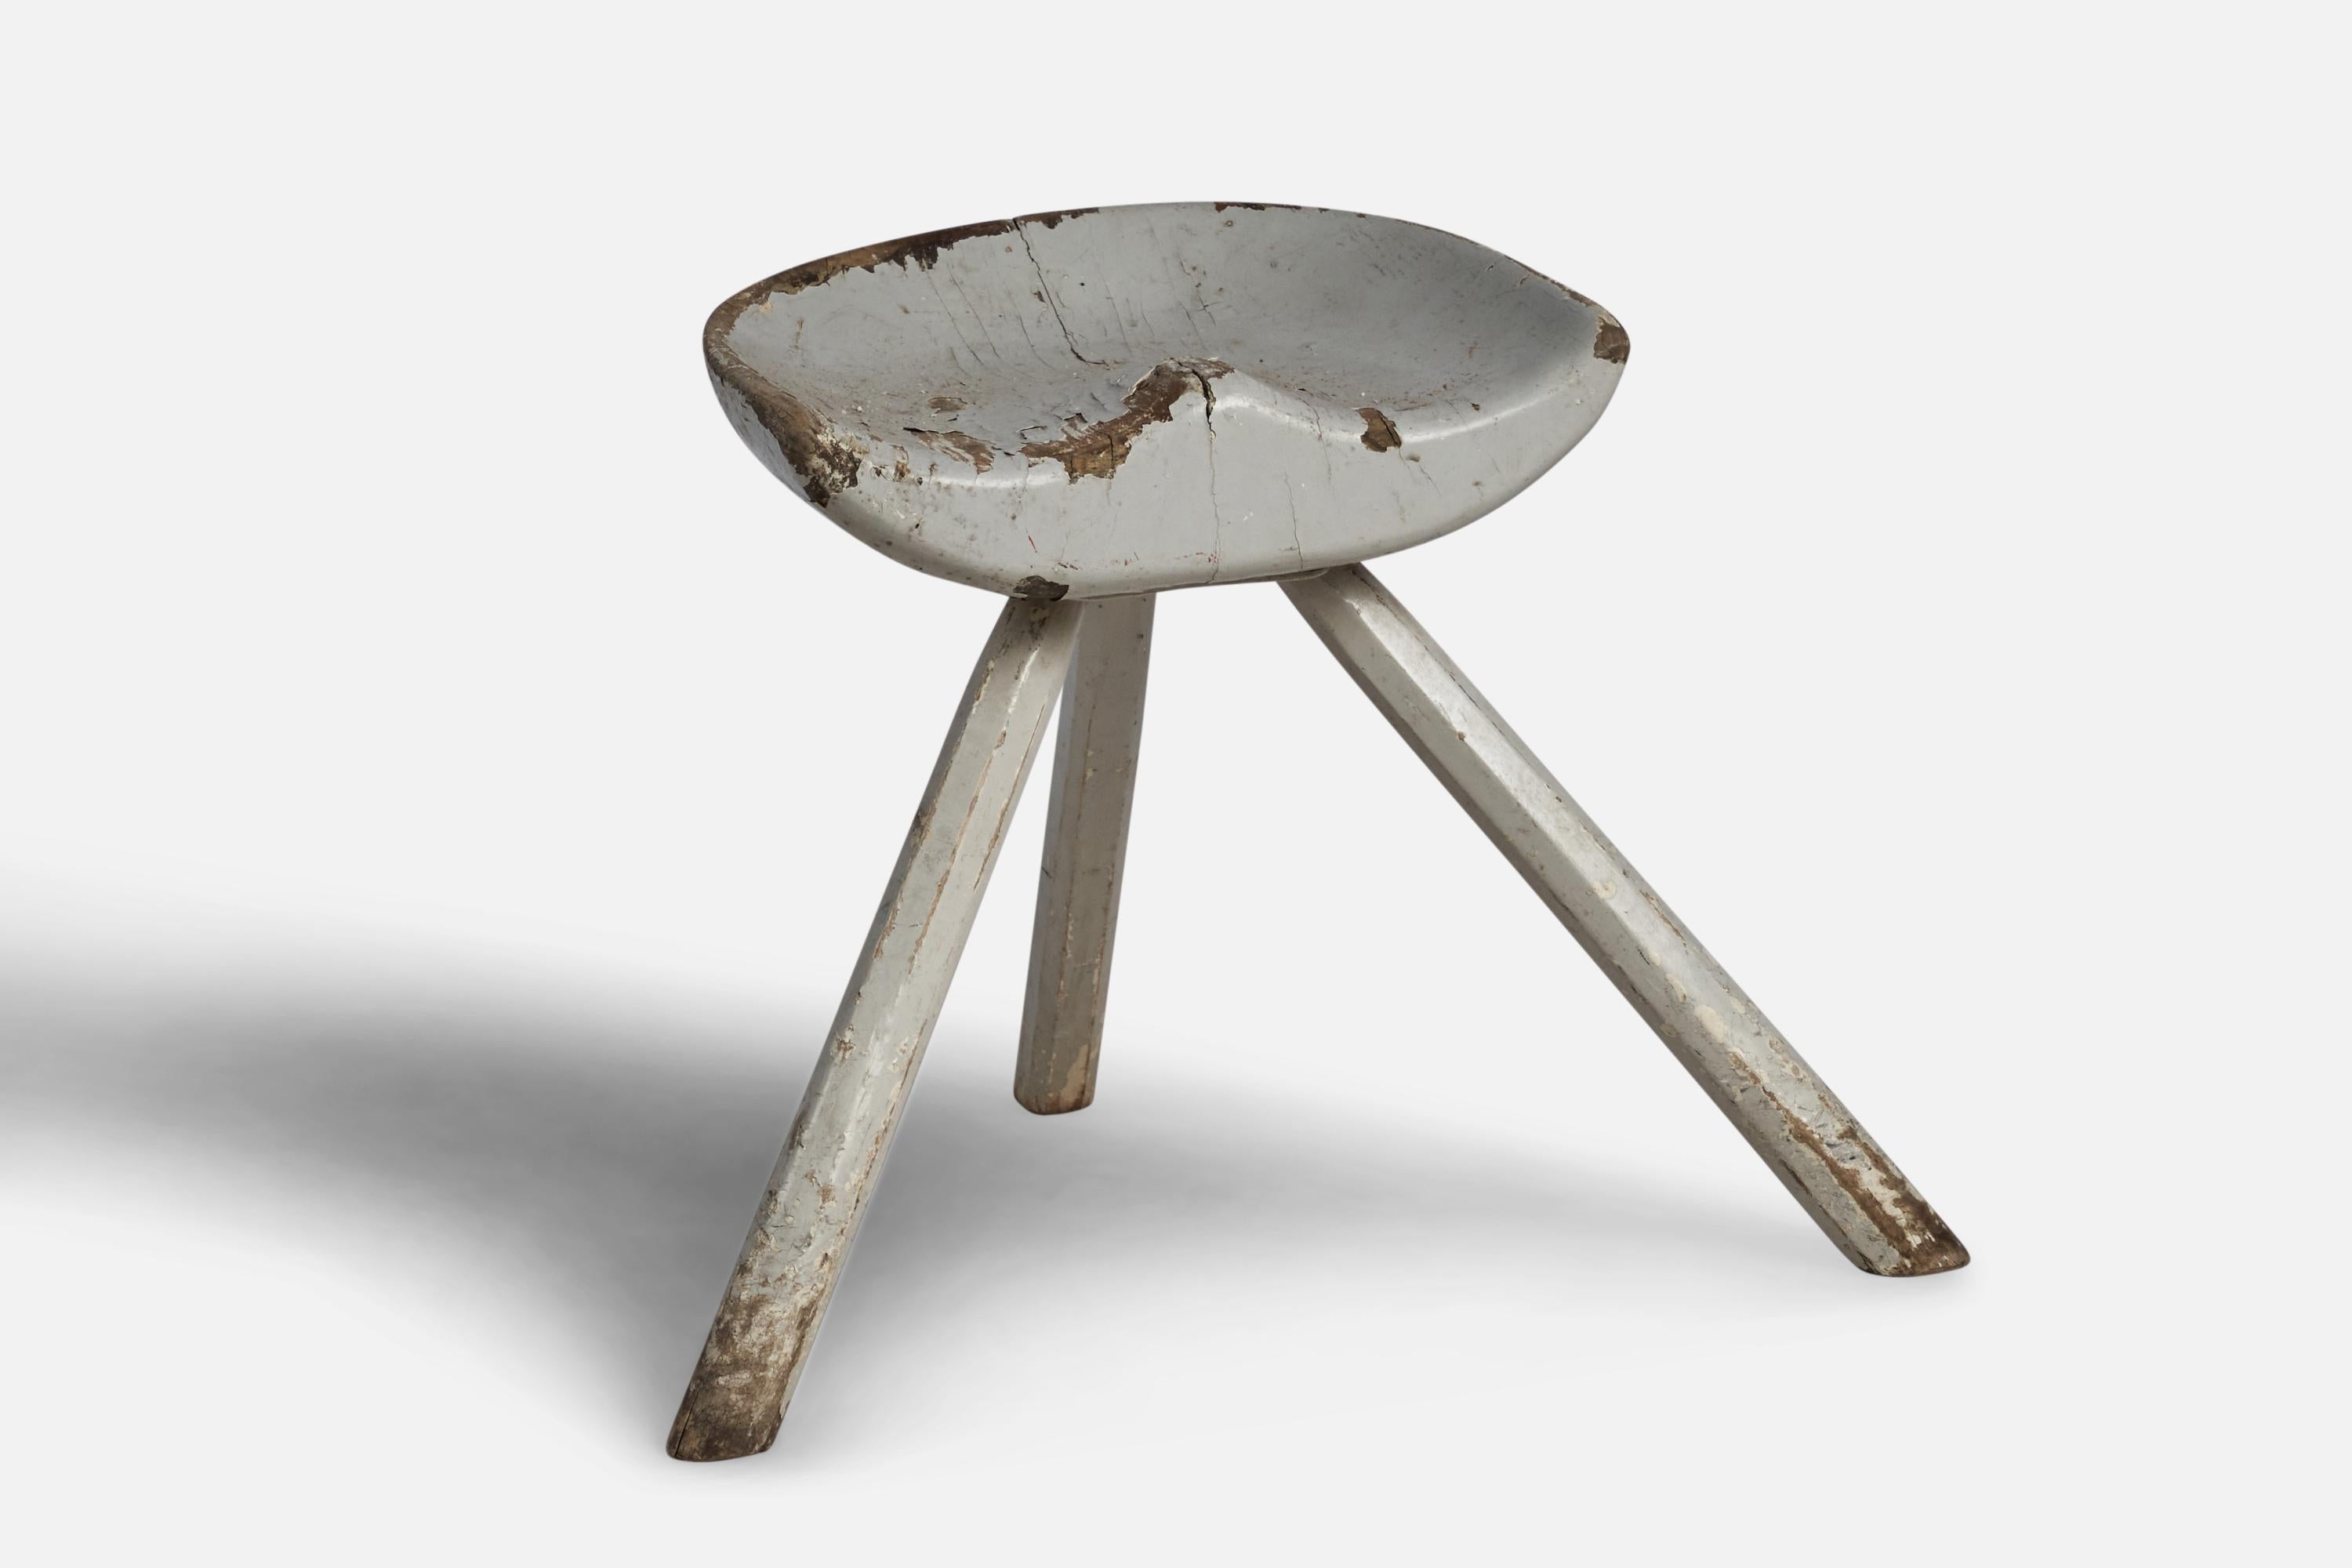 A grey-painted stool designed and produced in Sweden, c. 1930s.